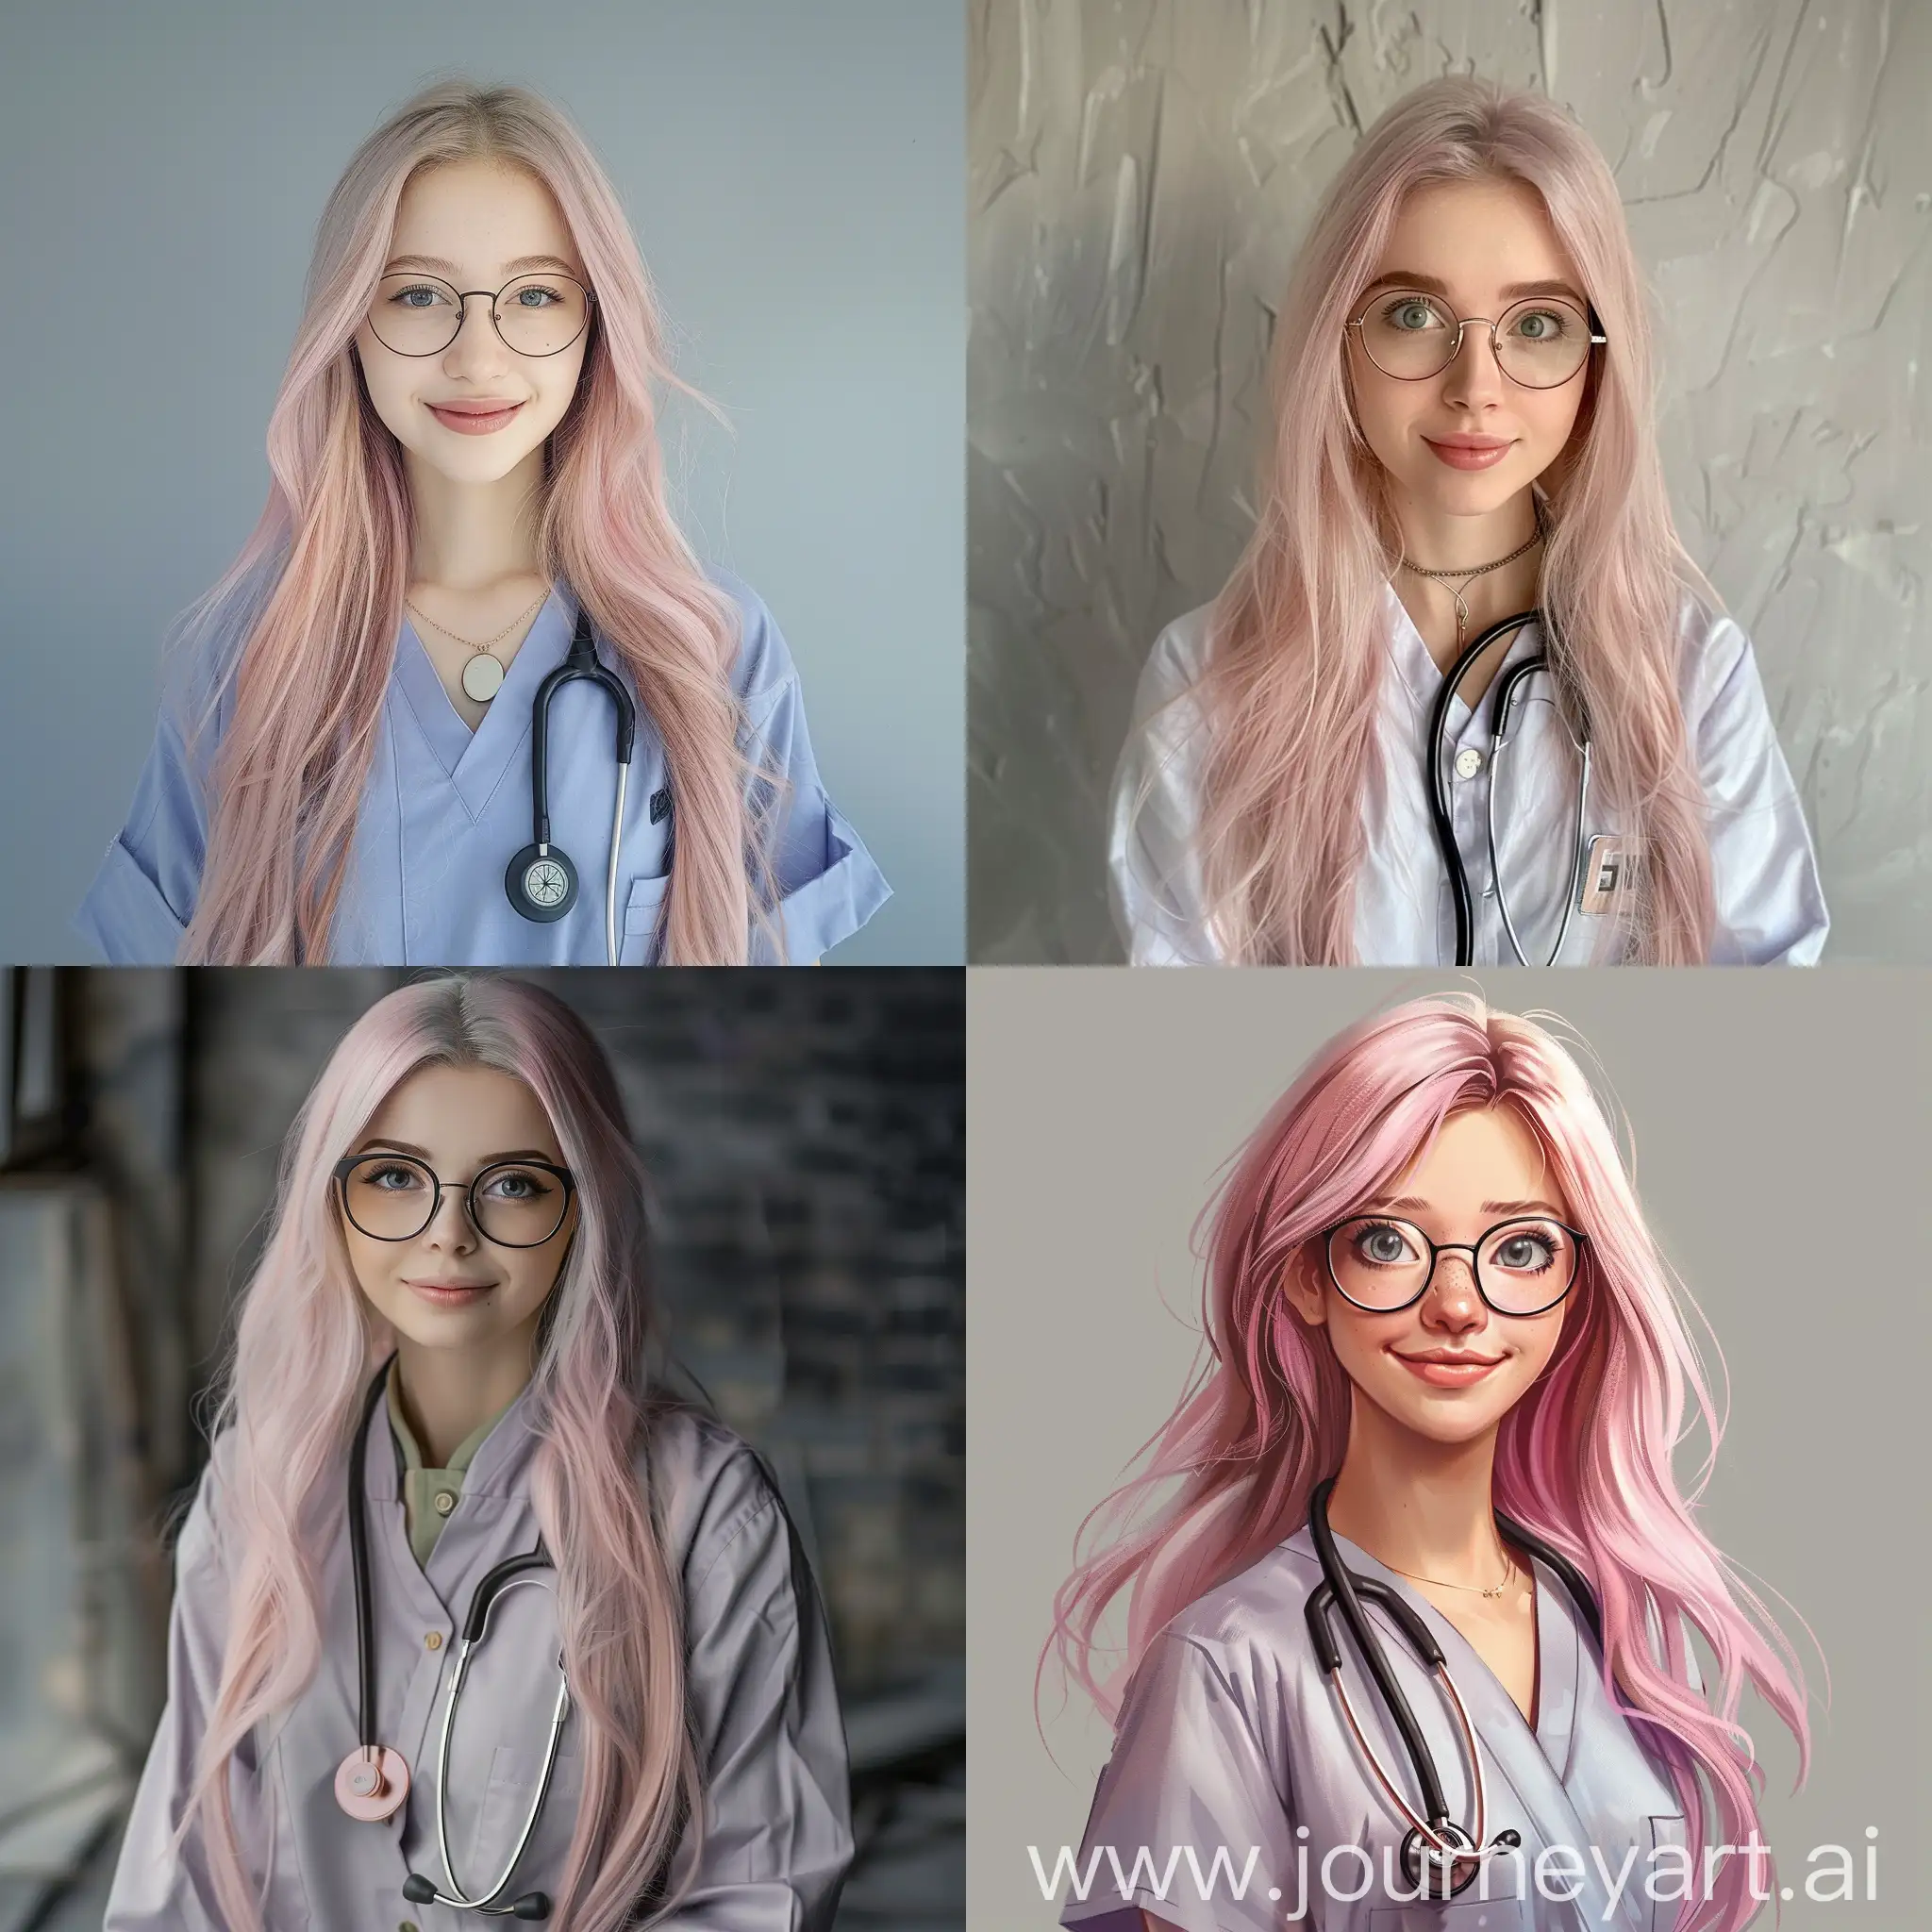 Elegant-Medical-Professional-with-Friendly-Smile-and-Pink-Hair